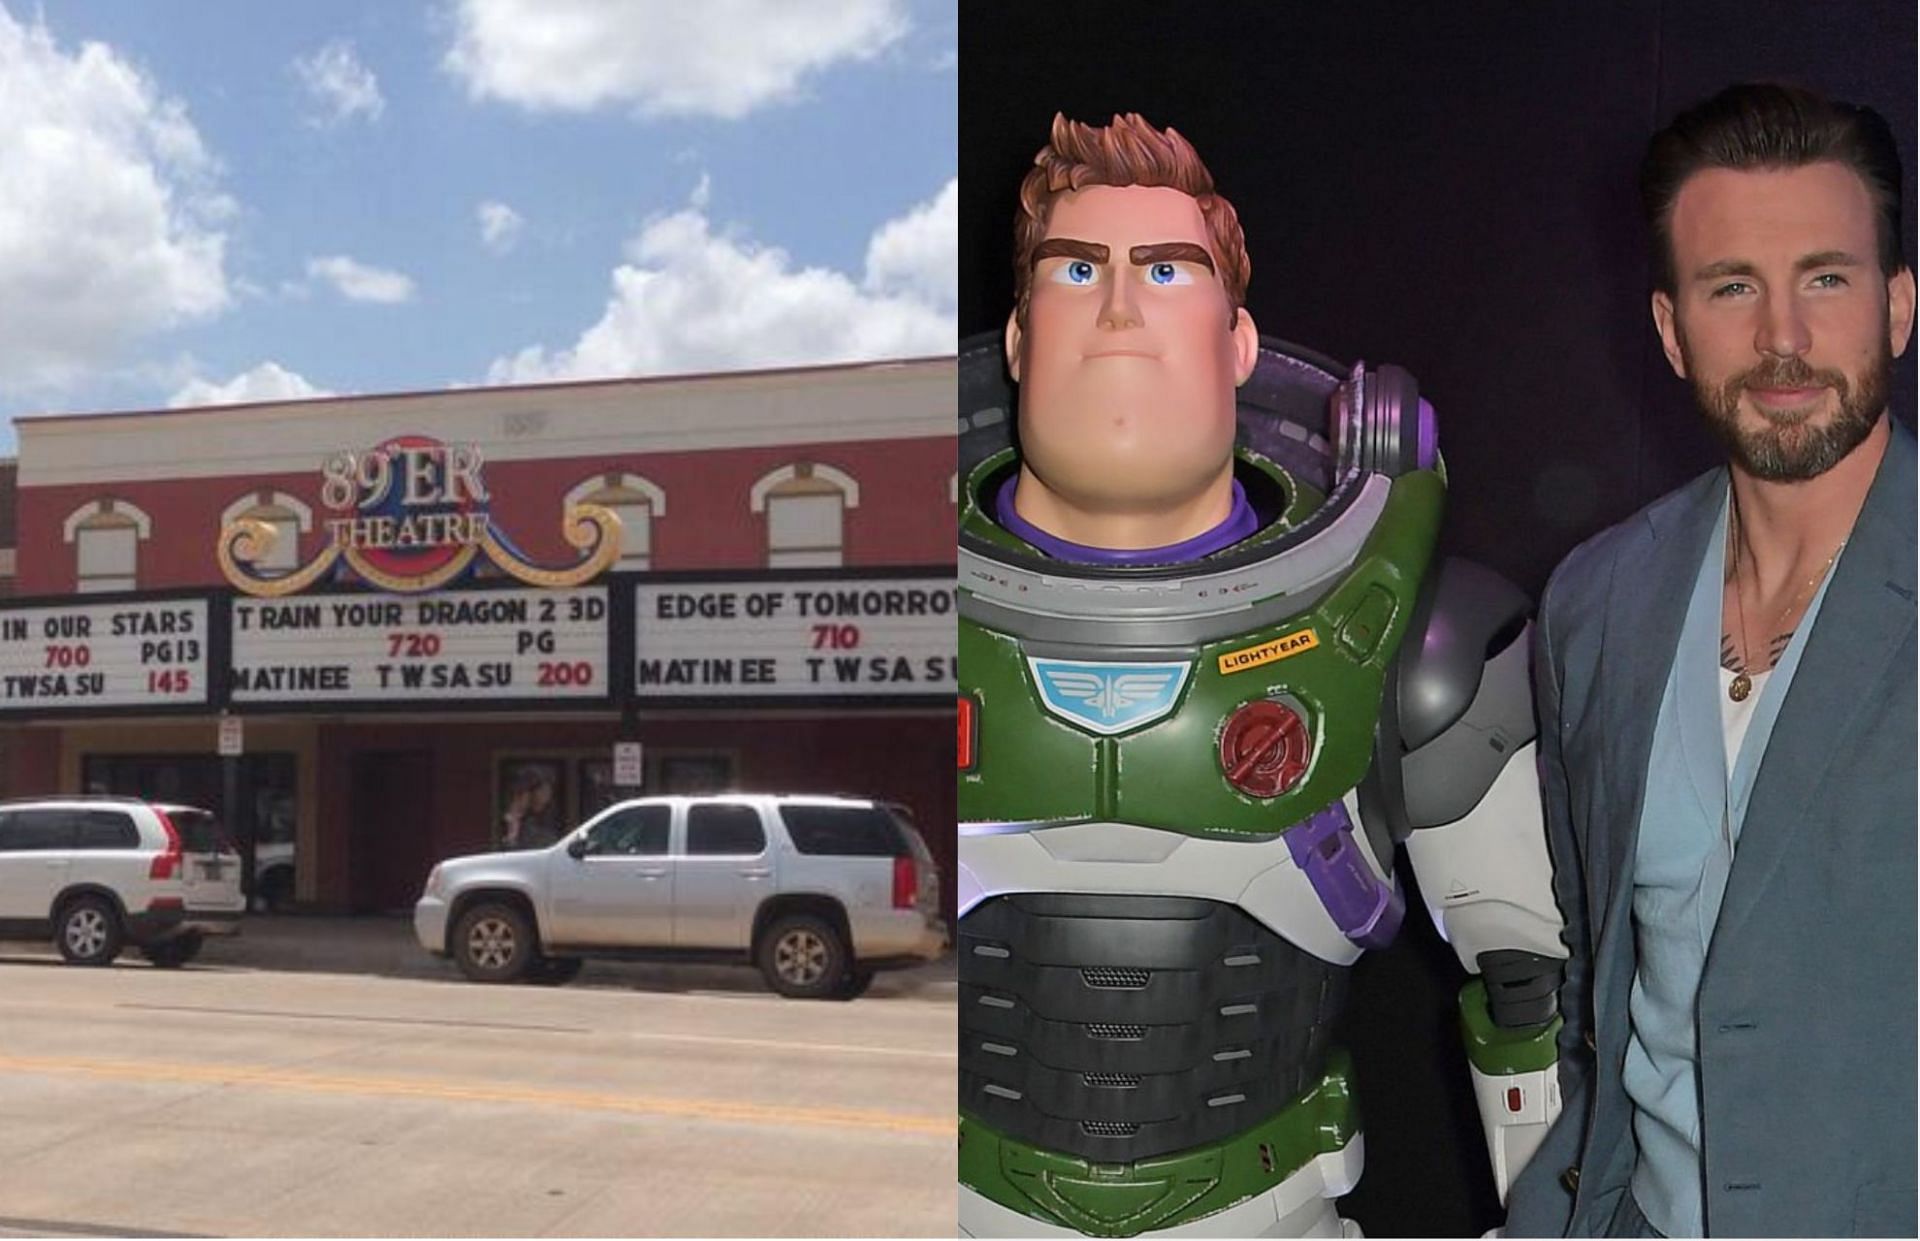 Oklahoma&#039;s 89er theatre issued a warning notice about Lightyear&#039;s same-gender kiss scene (Image via Nathan Gunter/Twitter and Getty Images)